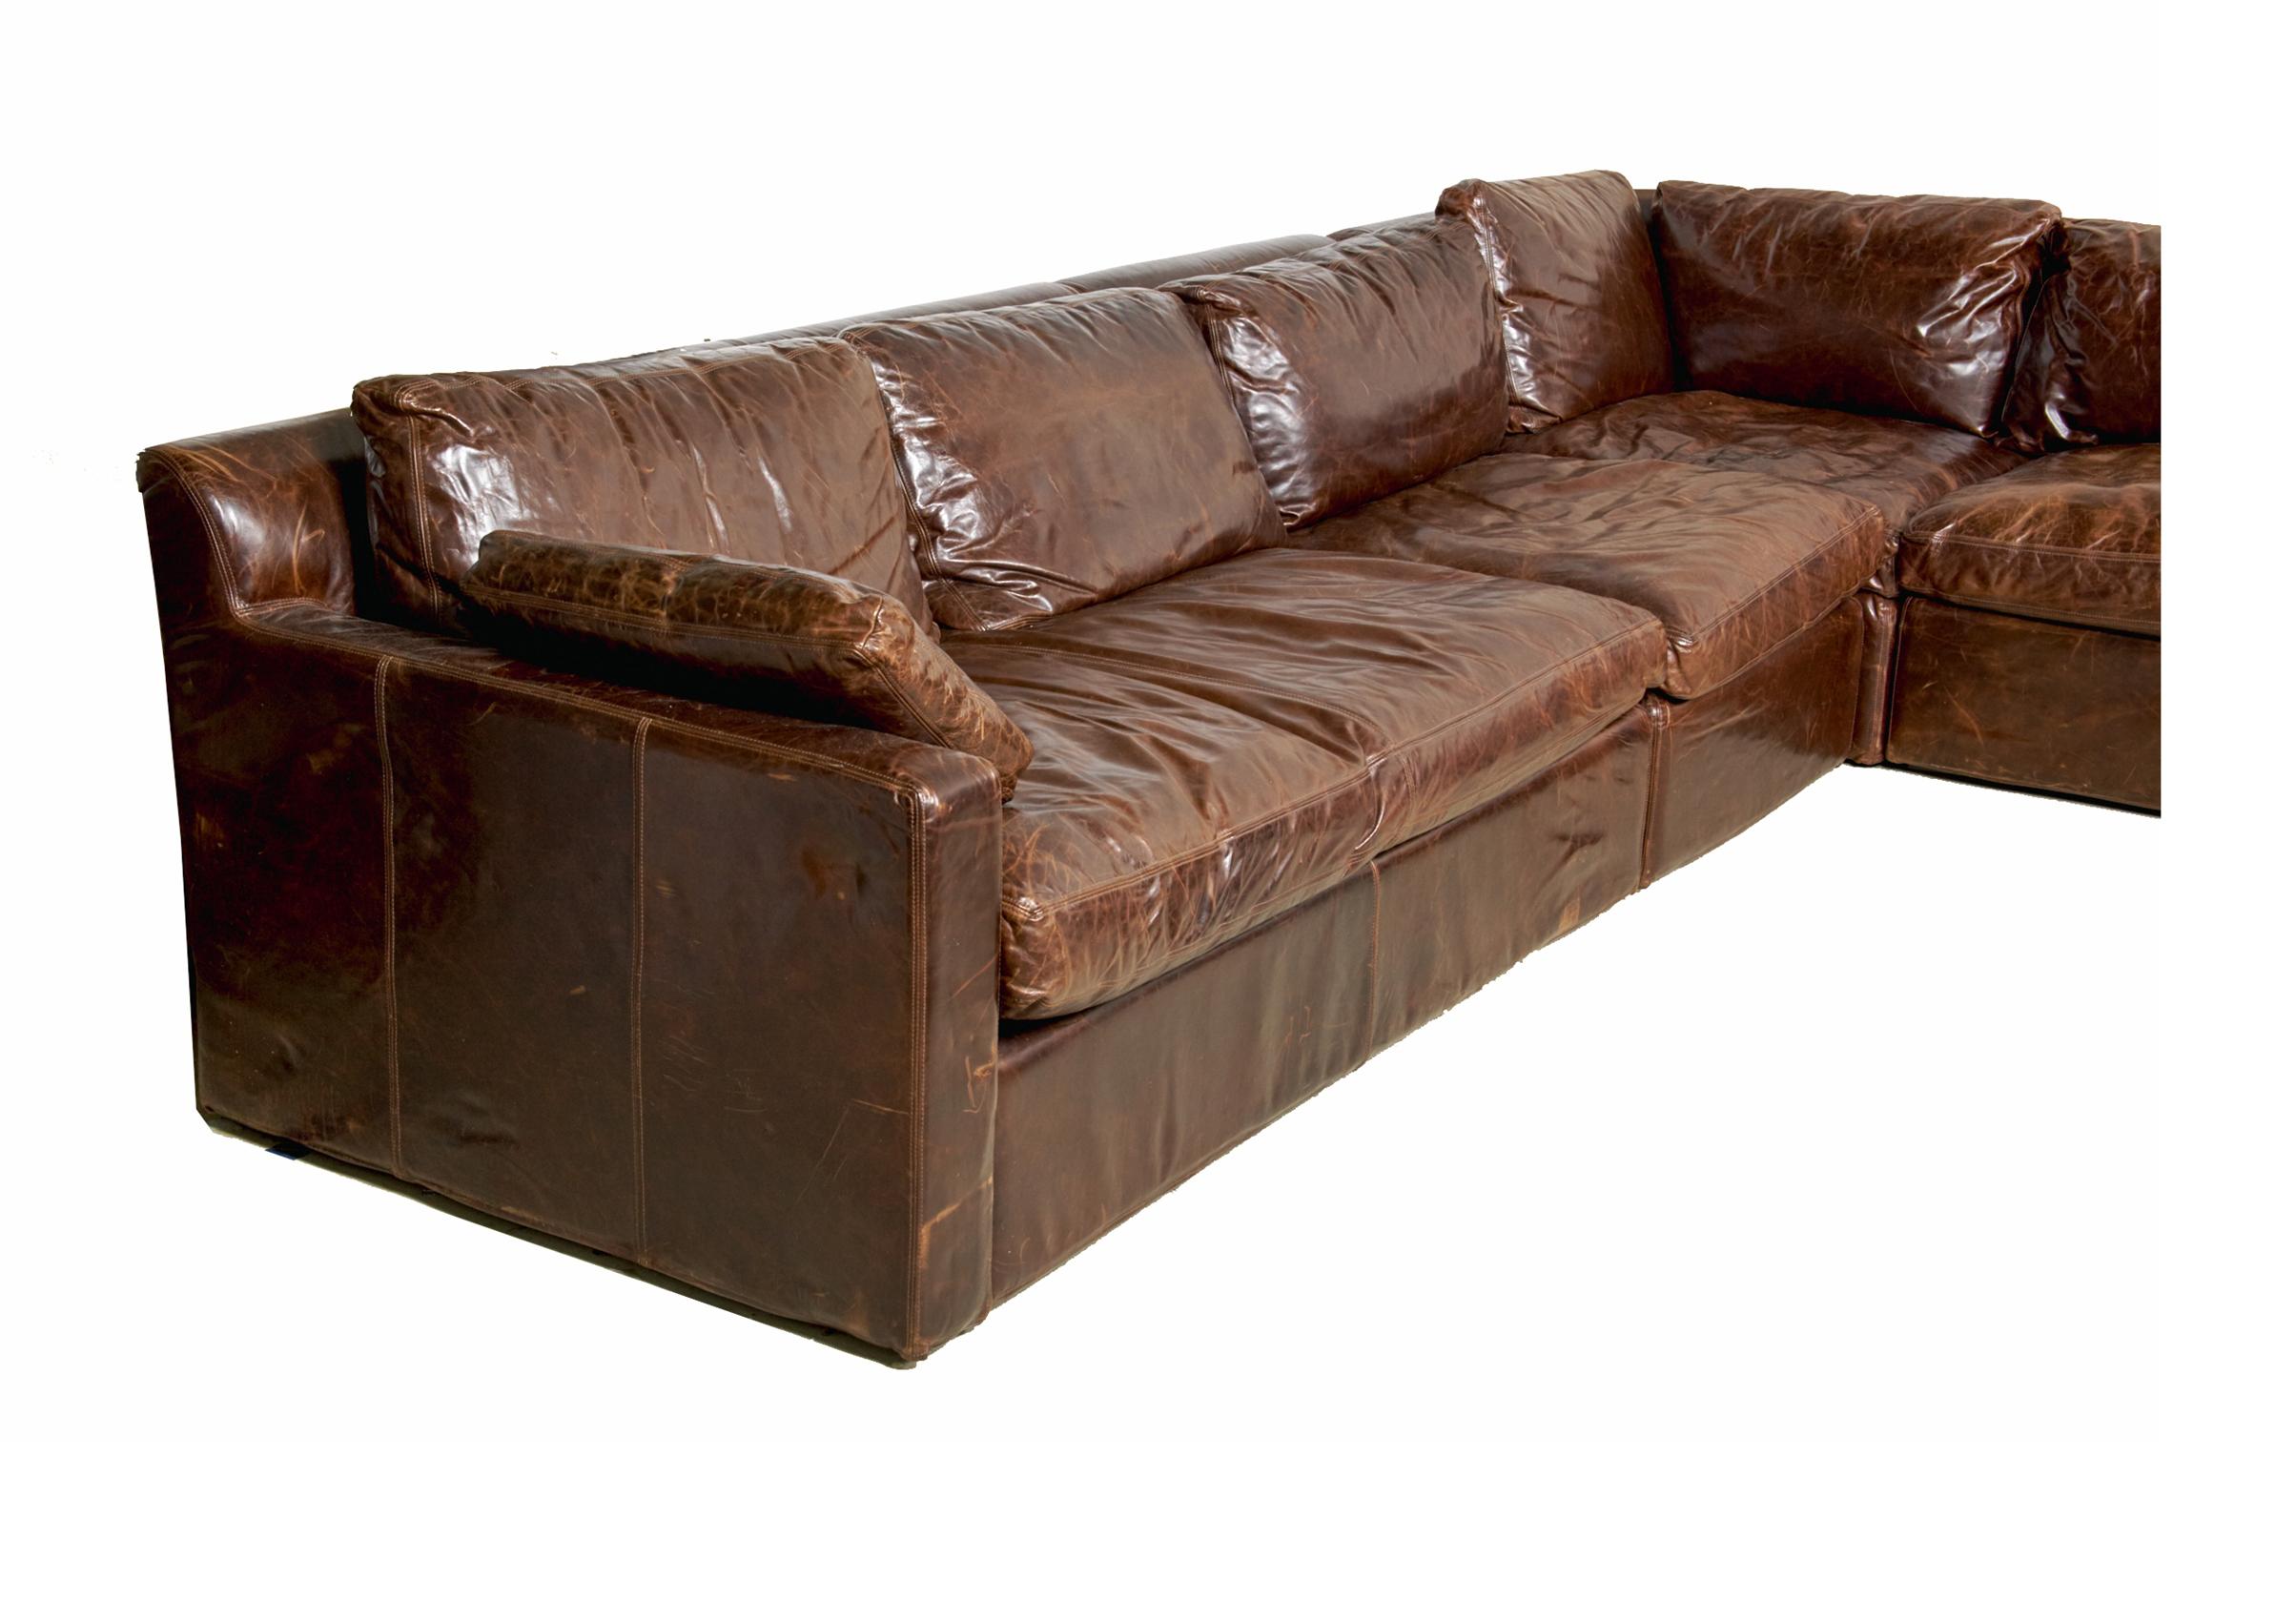 Luxurious brown leather sofa by Restoration Hardware. This is part of the Maxwell collection and has 4 sections. Super comfortable it has seen little use and will continue to gain character as it is sat in. Leather has a distressed finish, It